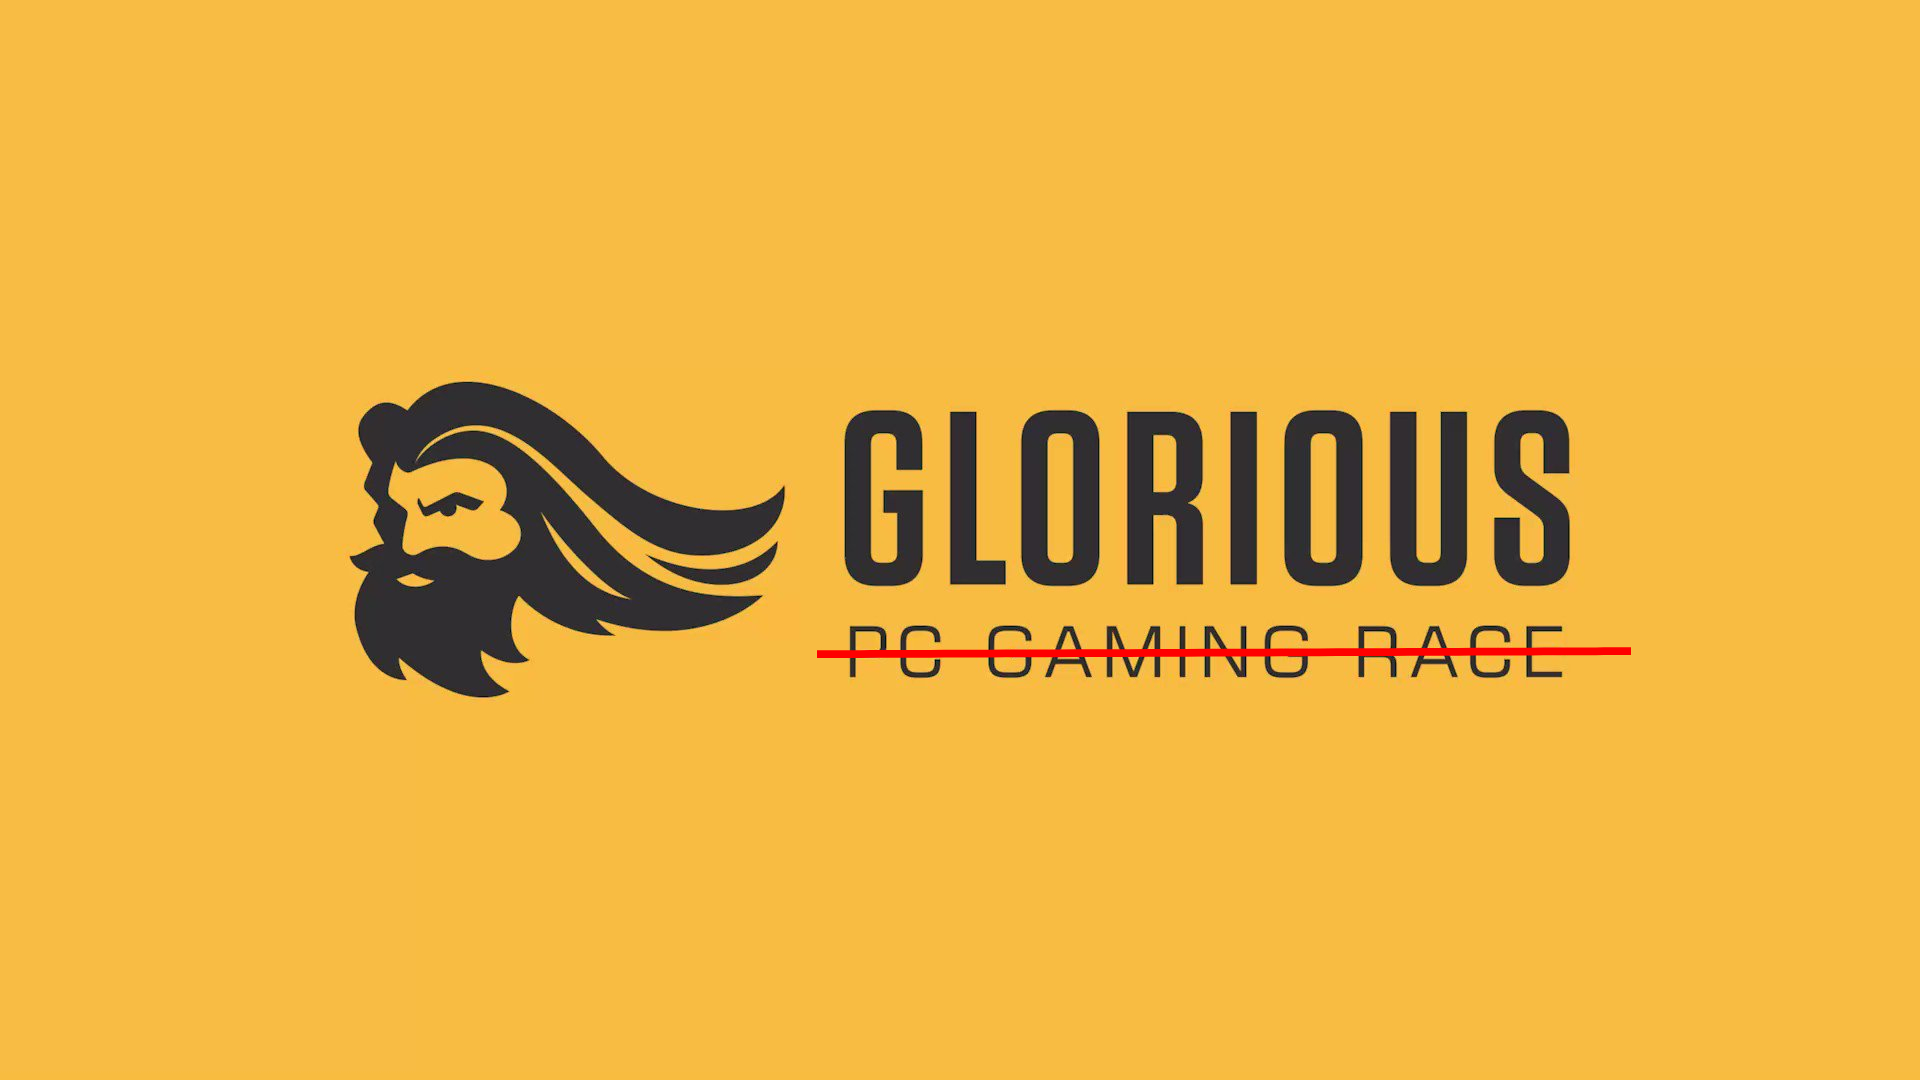 Gaming PC peripheral maker Glorious ditches controversial name